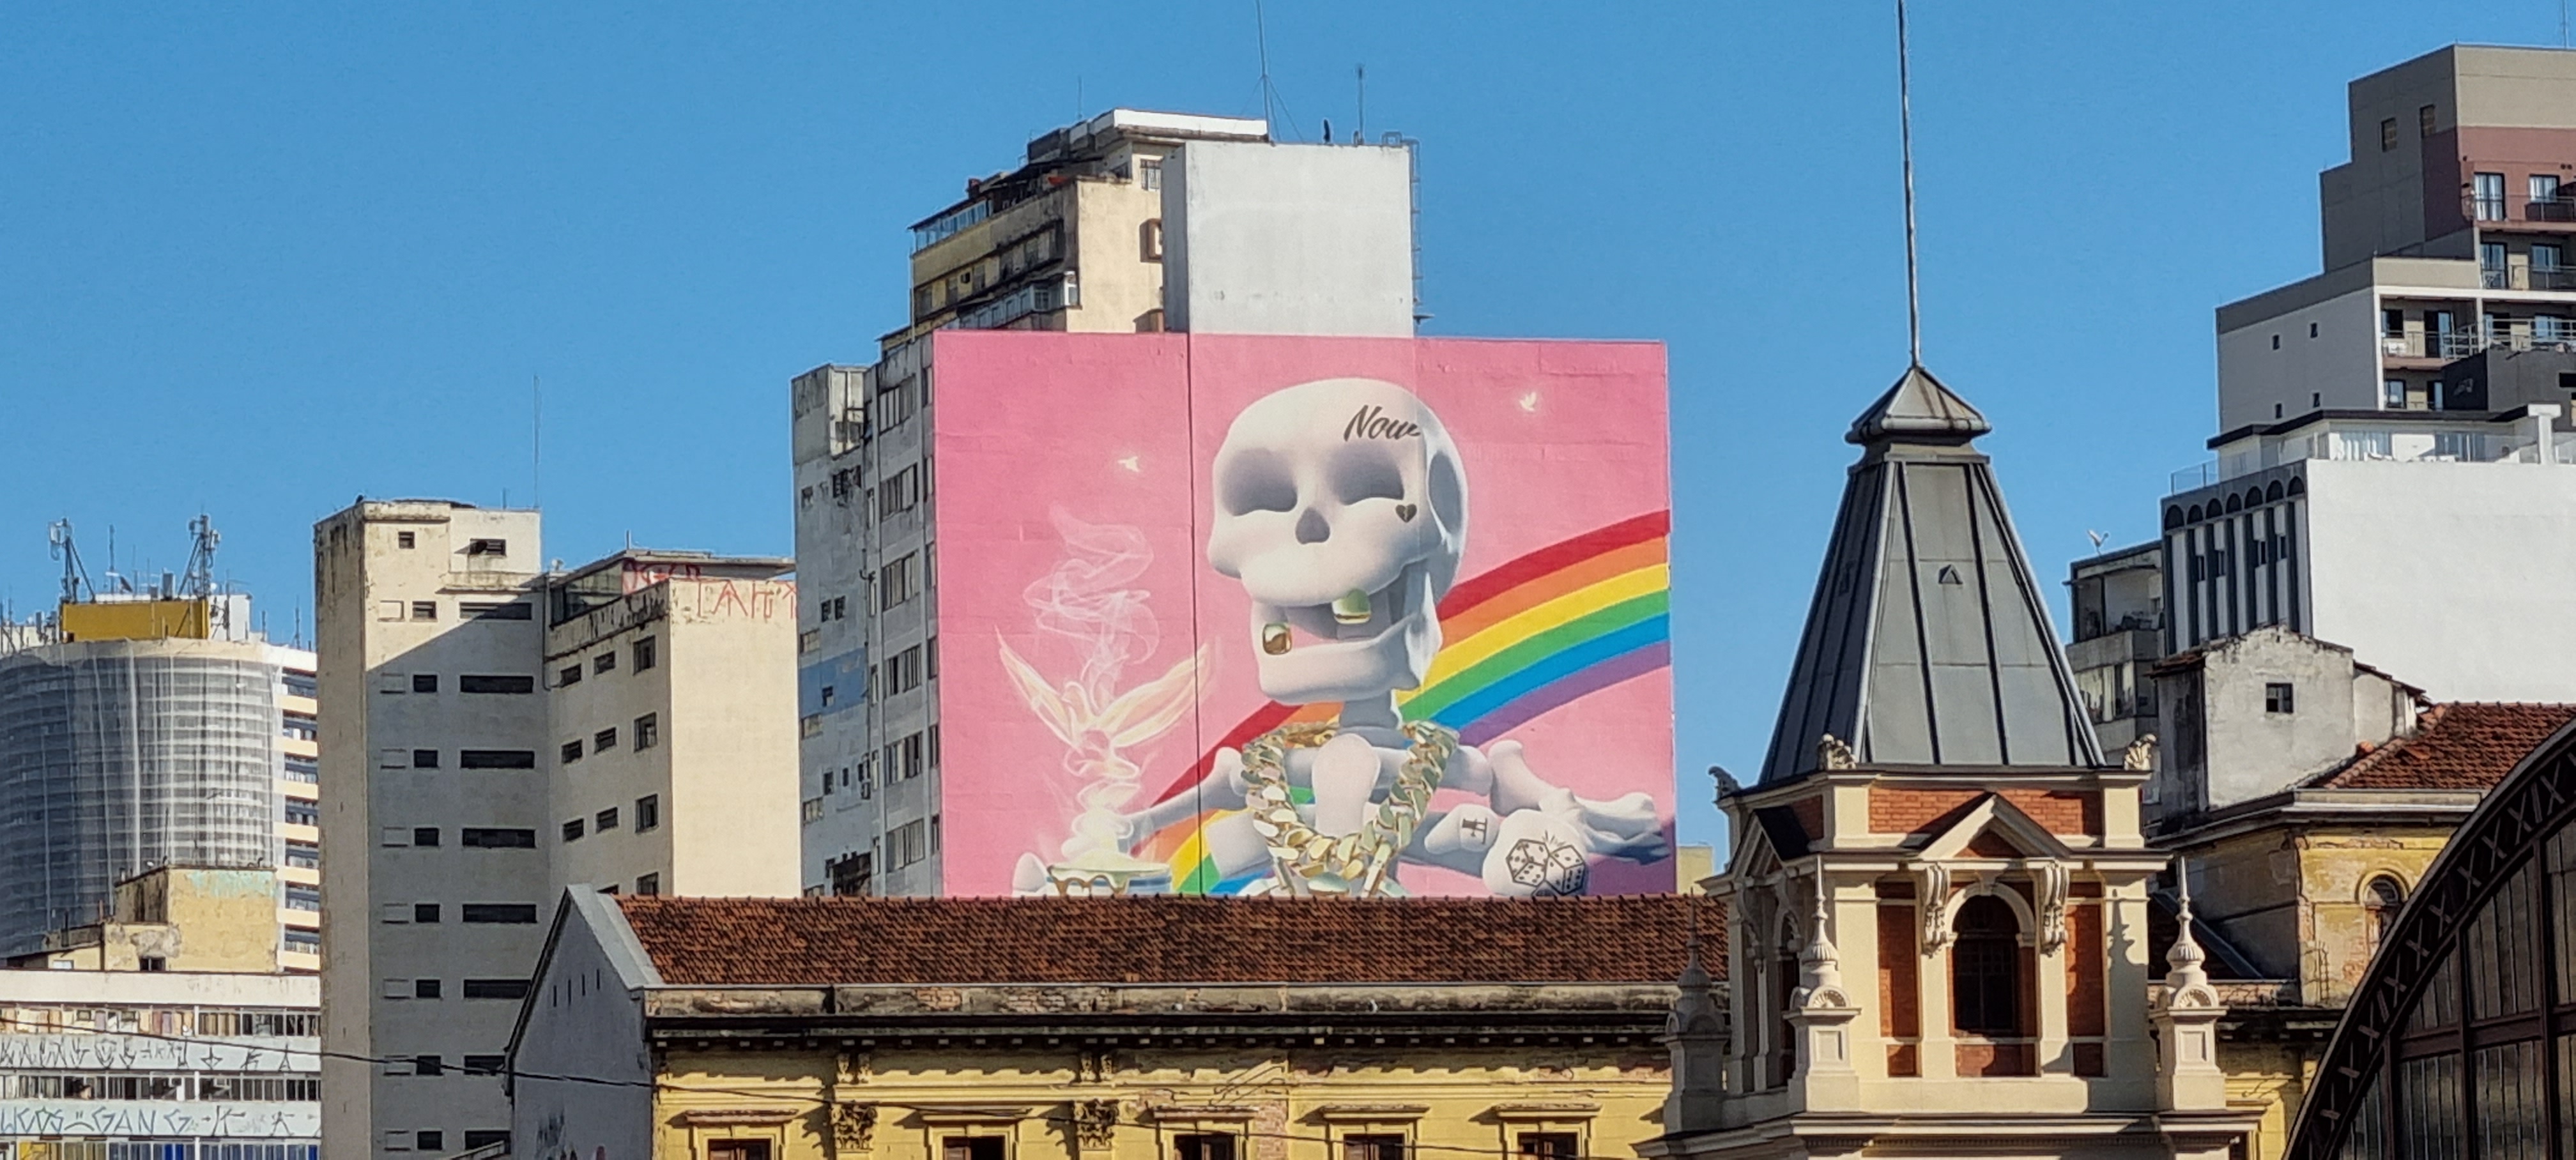 Picture of an urban landscape in which in one of the buildings you can see a mural of a funky skeleton with a rainbow in the background.